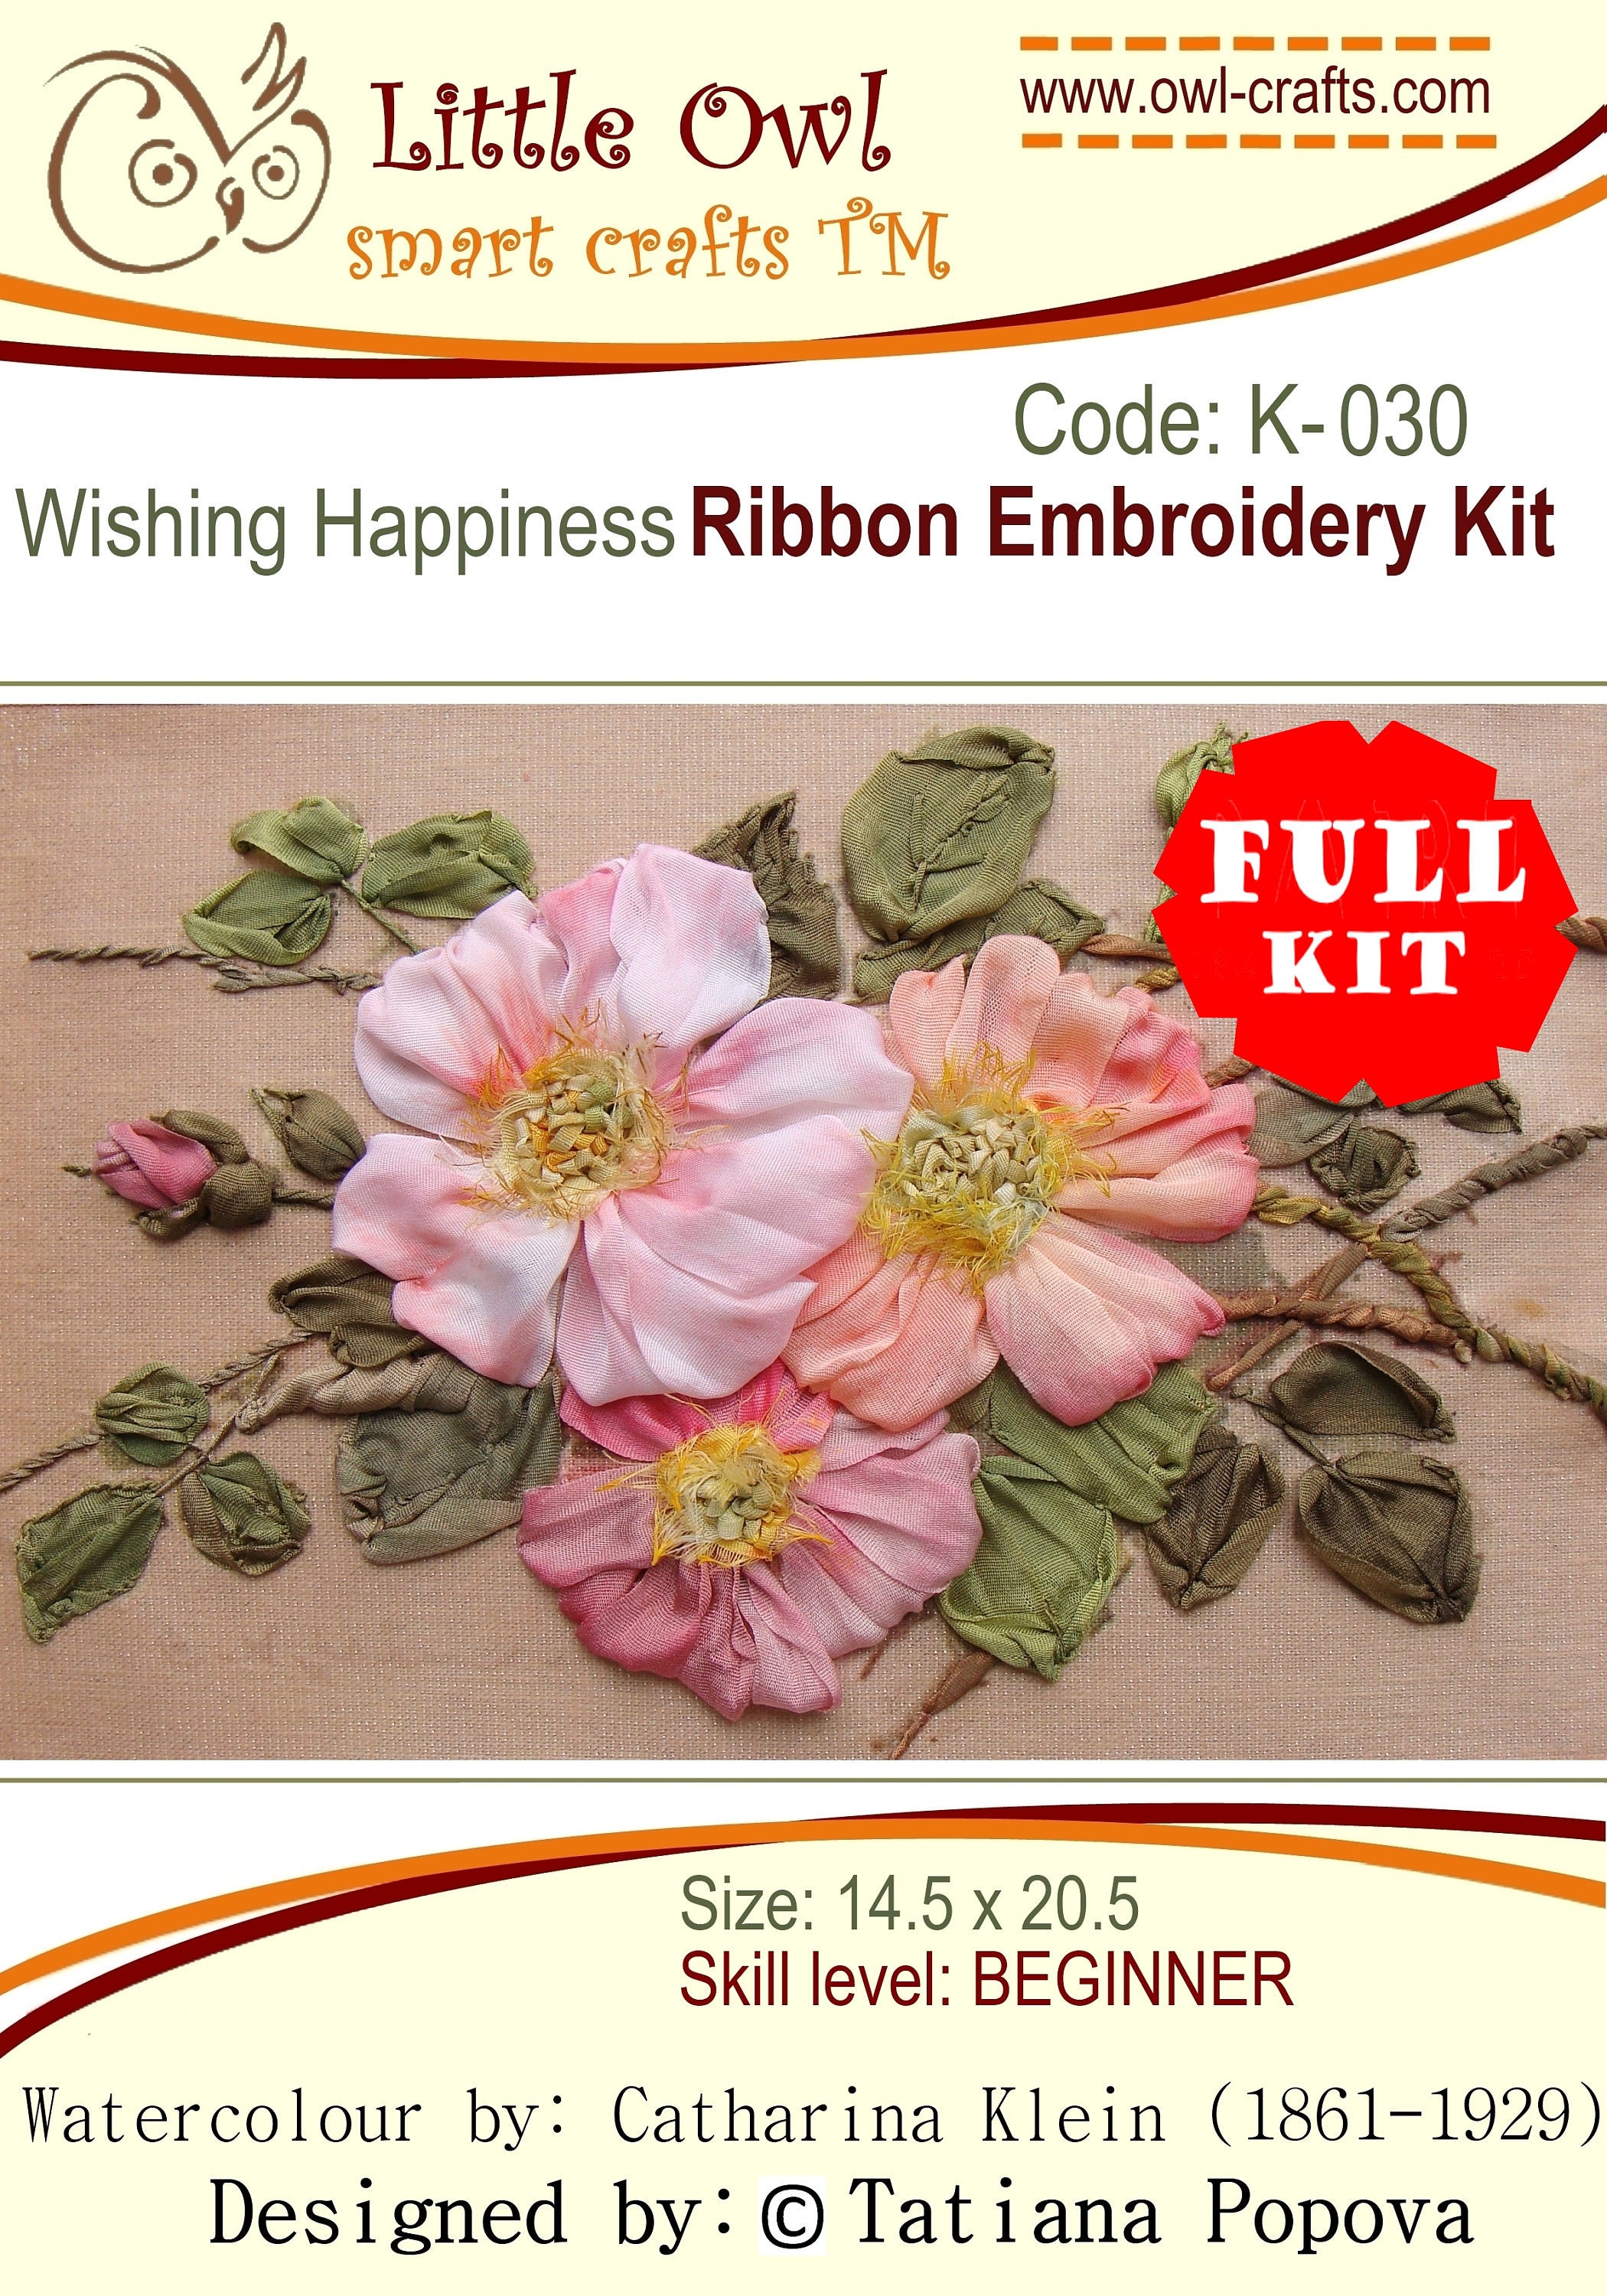 History of silk ribbon embroidery by Little Owl SmartCrafts: facts,  designers, ideas for inspiration.